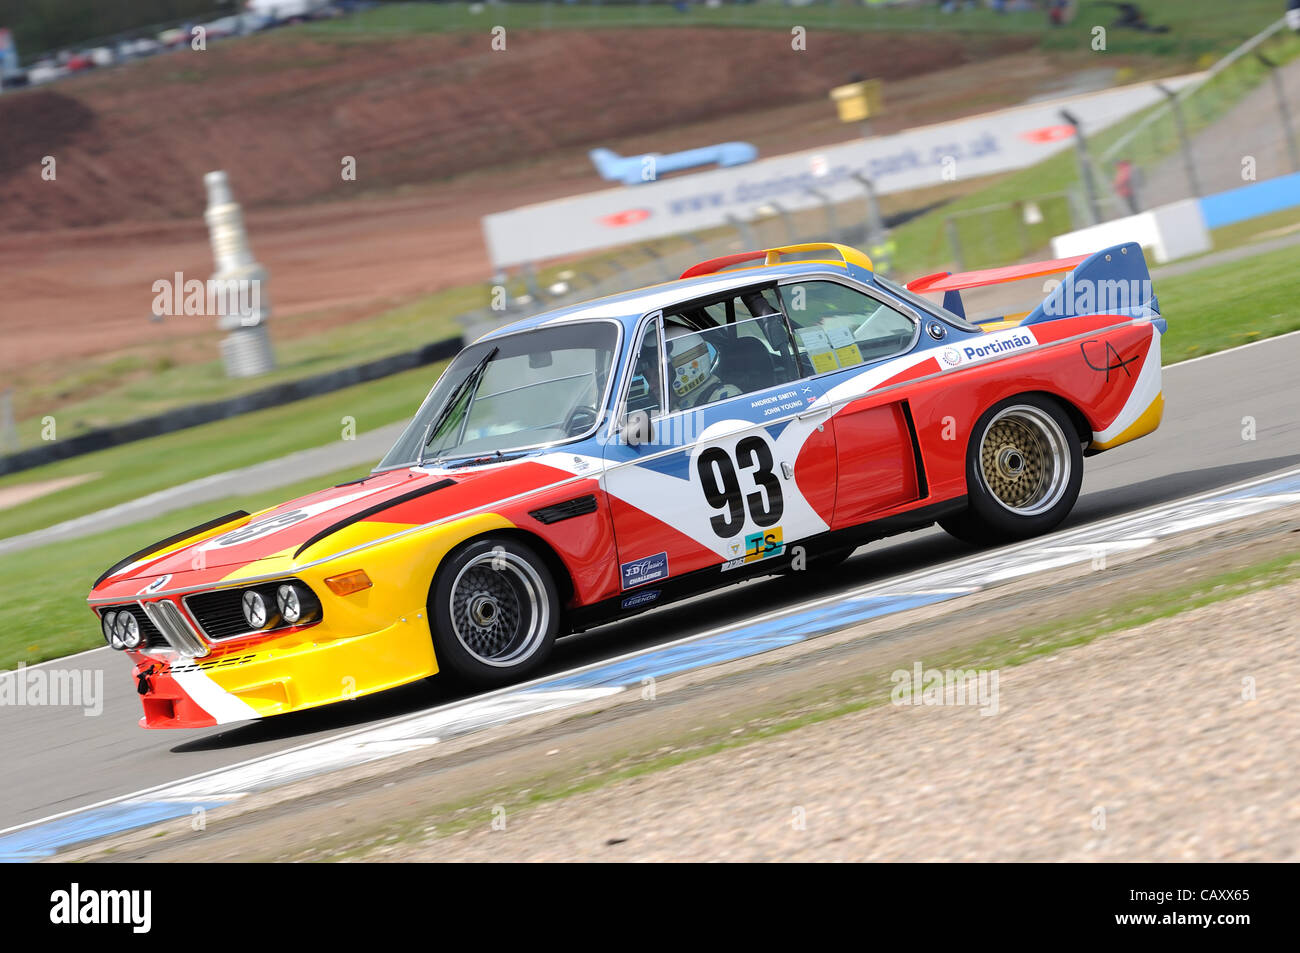 5th May 2012, Donington Park Racing Circuit, UK.  The BMW 3.0 CSL of Andrew Smith and John Young at the Donington Historic Festival Stock Photo